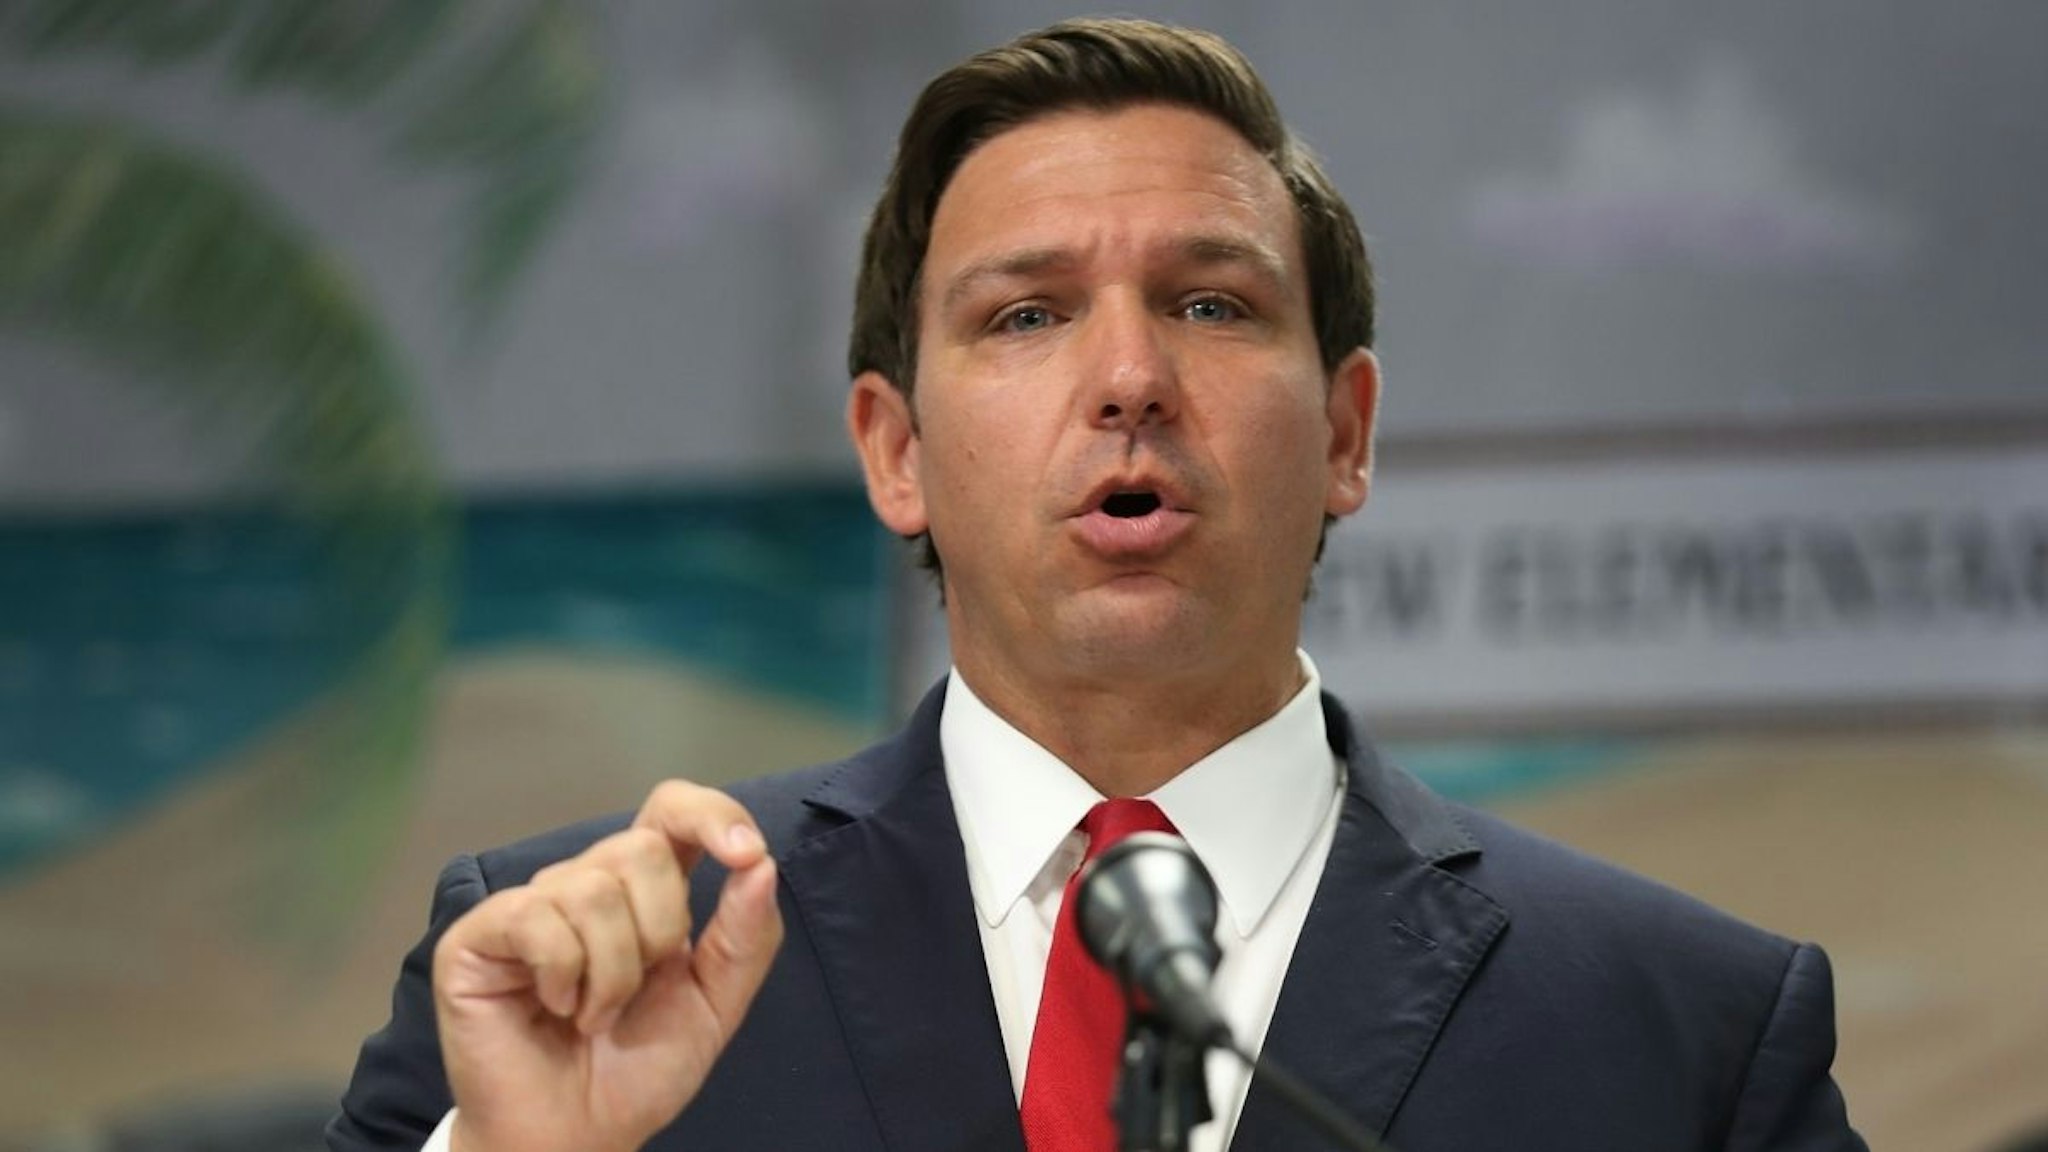 Florida Gov. Ron DeSantis announces that he wants to raise the minimum starting salary for teachers during a press conference held at Bayview Elementary School on October 07, 2019 in Fort Lauderdale, Florida.